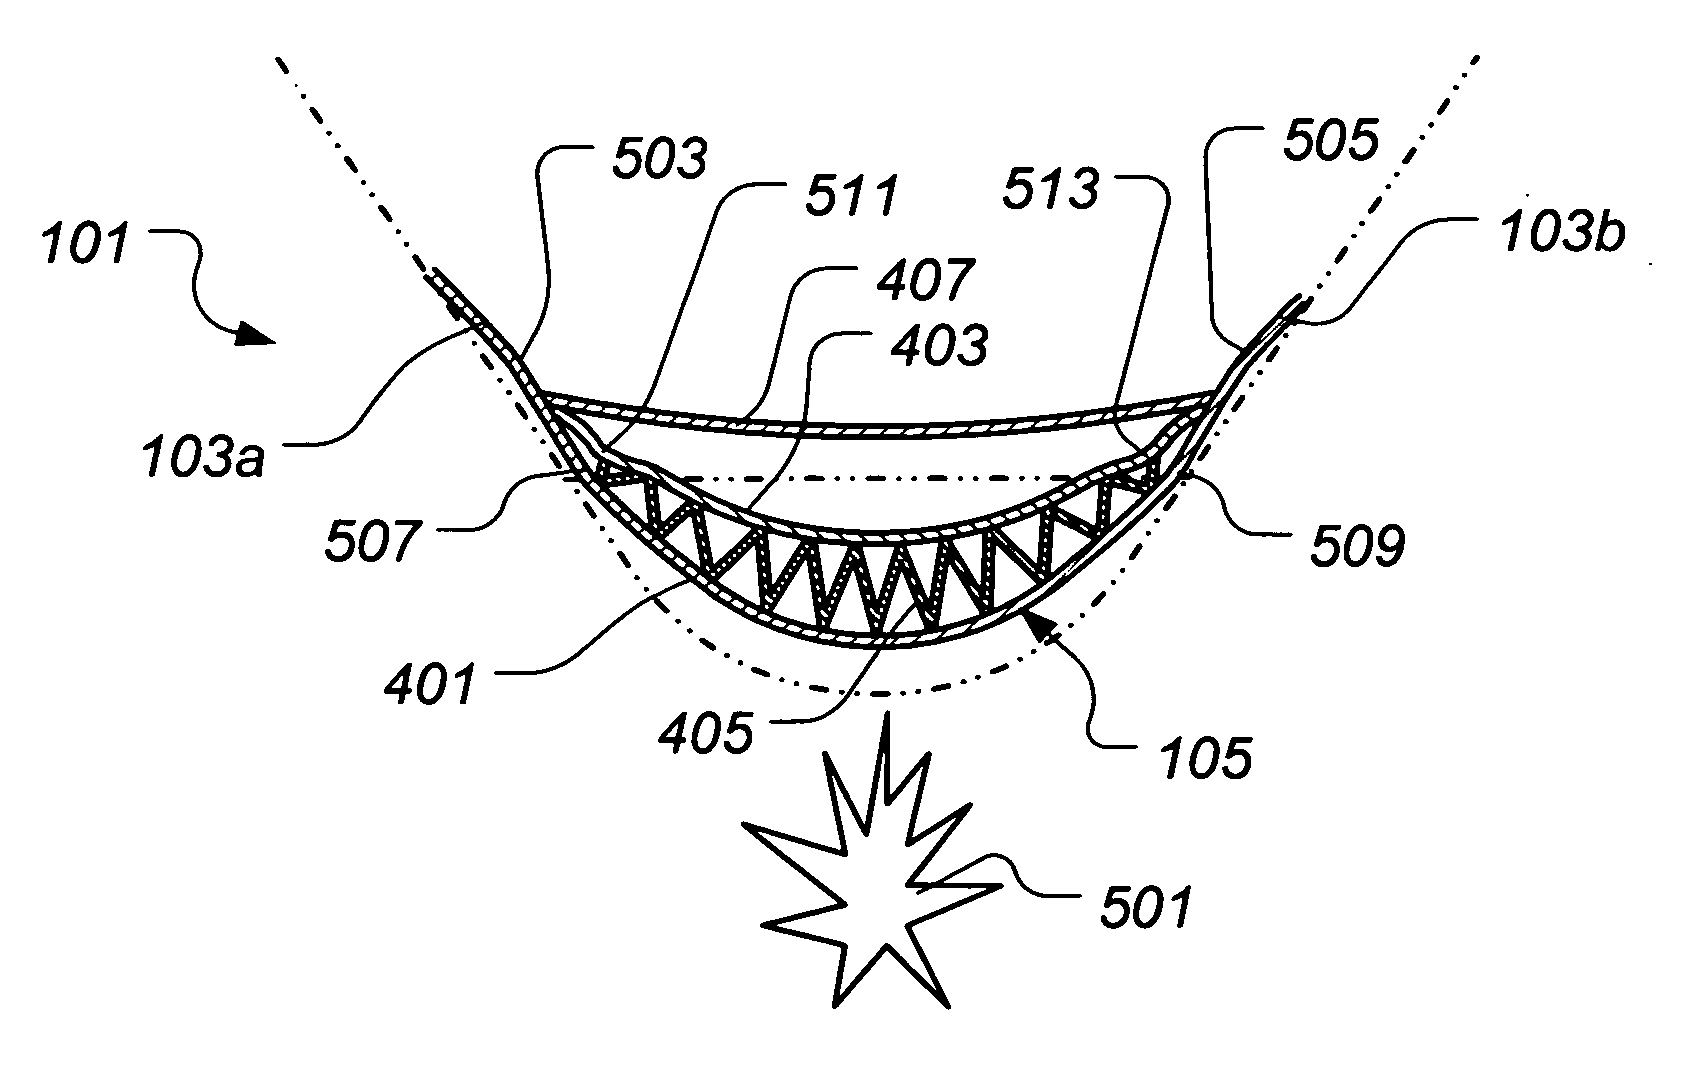 Apparatus for inhibiting effects of an explosive blast